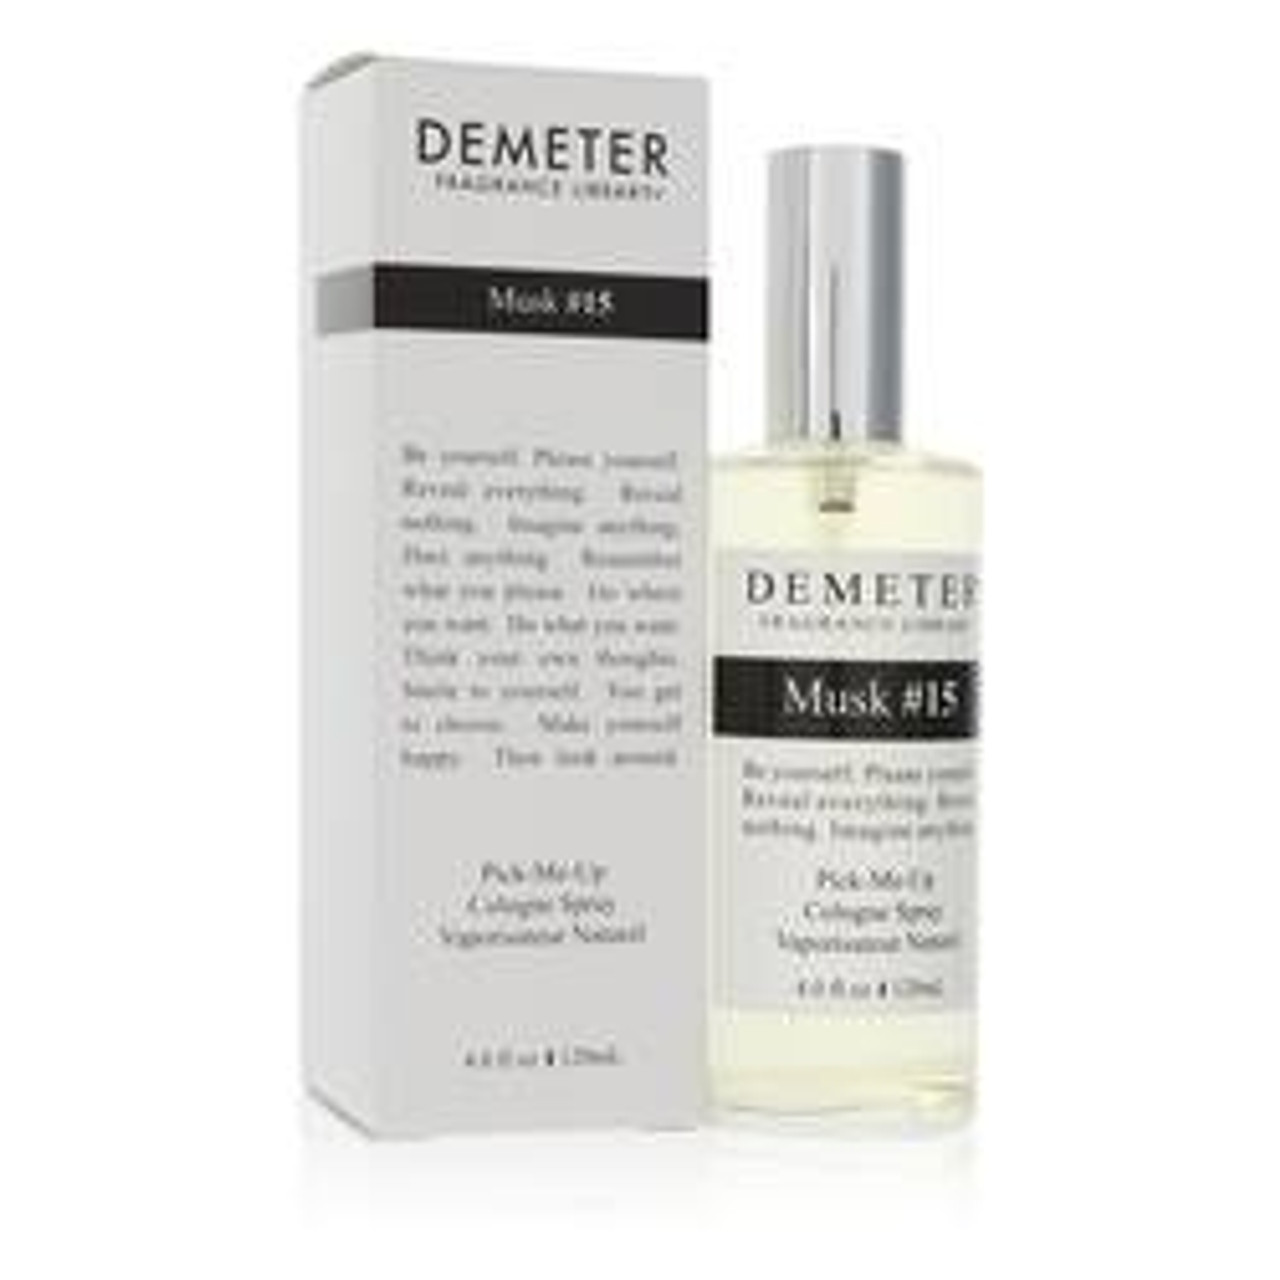 Demeter Musk #15 Cologne By Demeter Cologne Spray (Unisex) 4 oz for Men - [From 79.50 - Choose pk Qty ] - *Ships from Miami